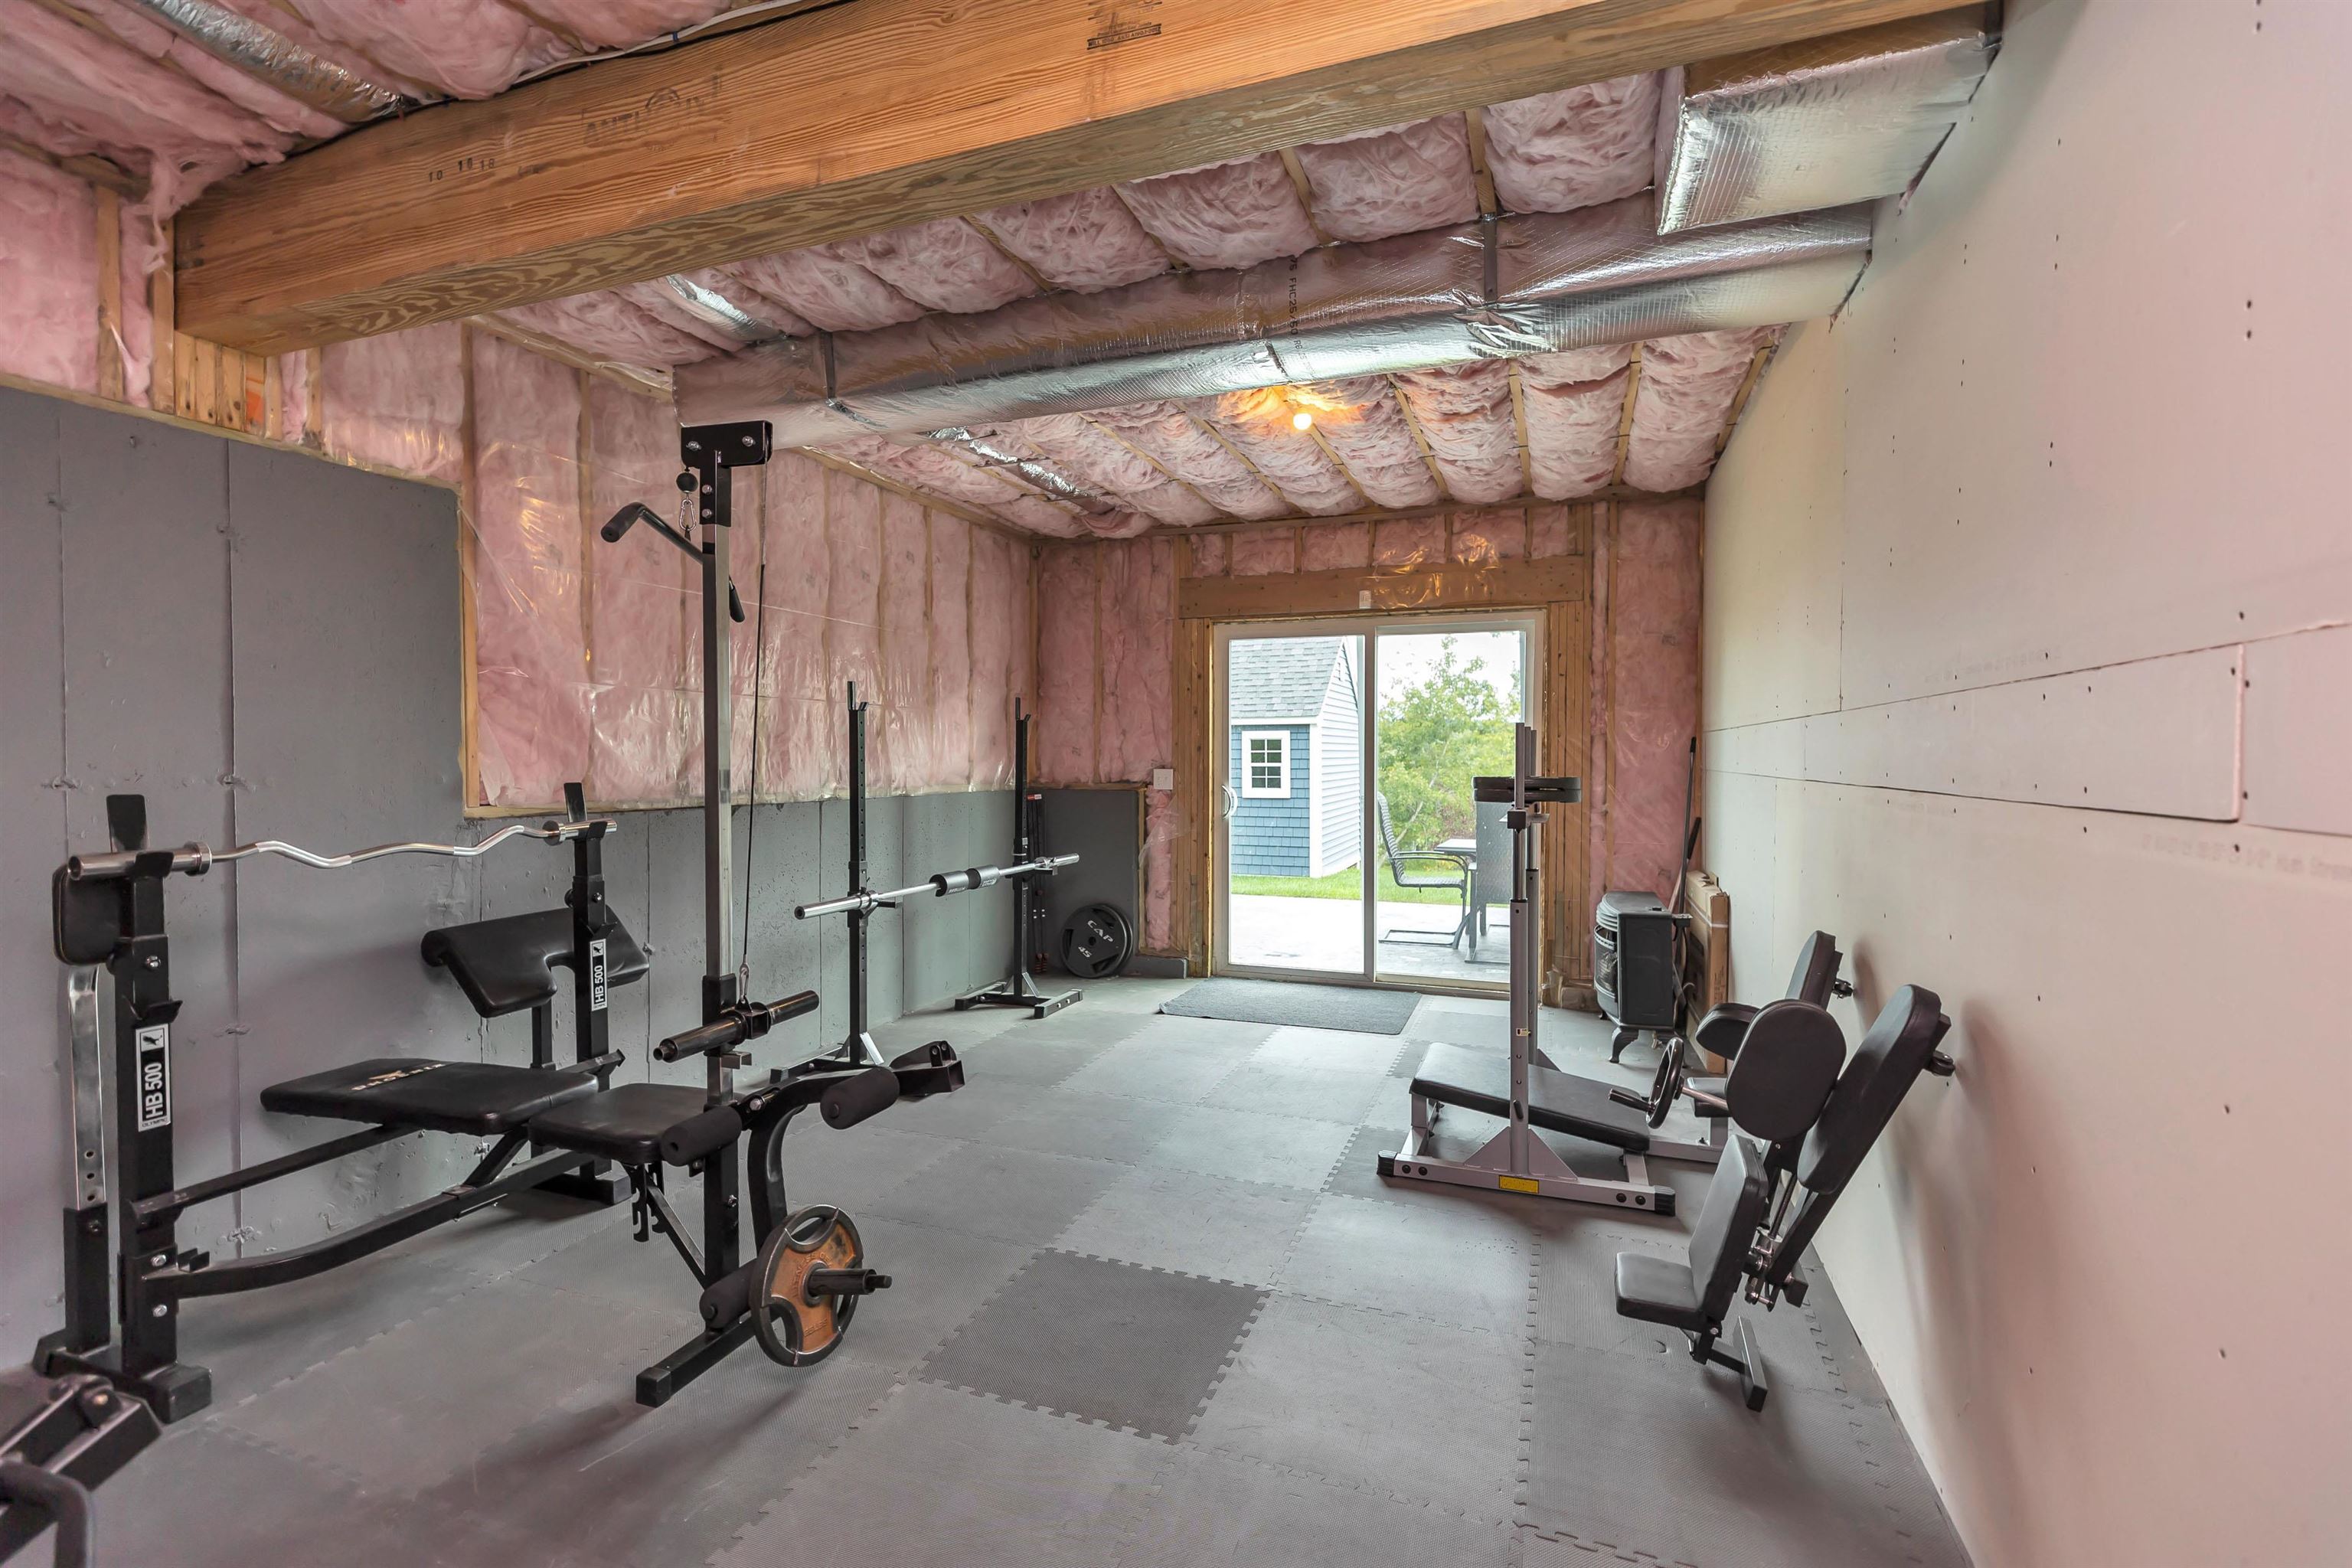 GYM area in Basement with Sliders